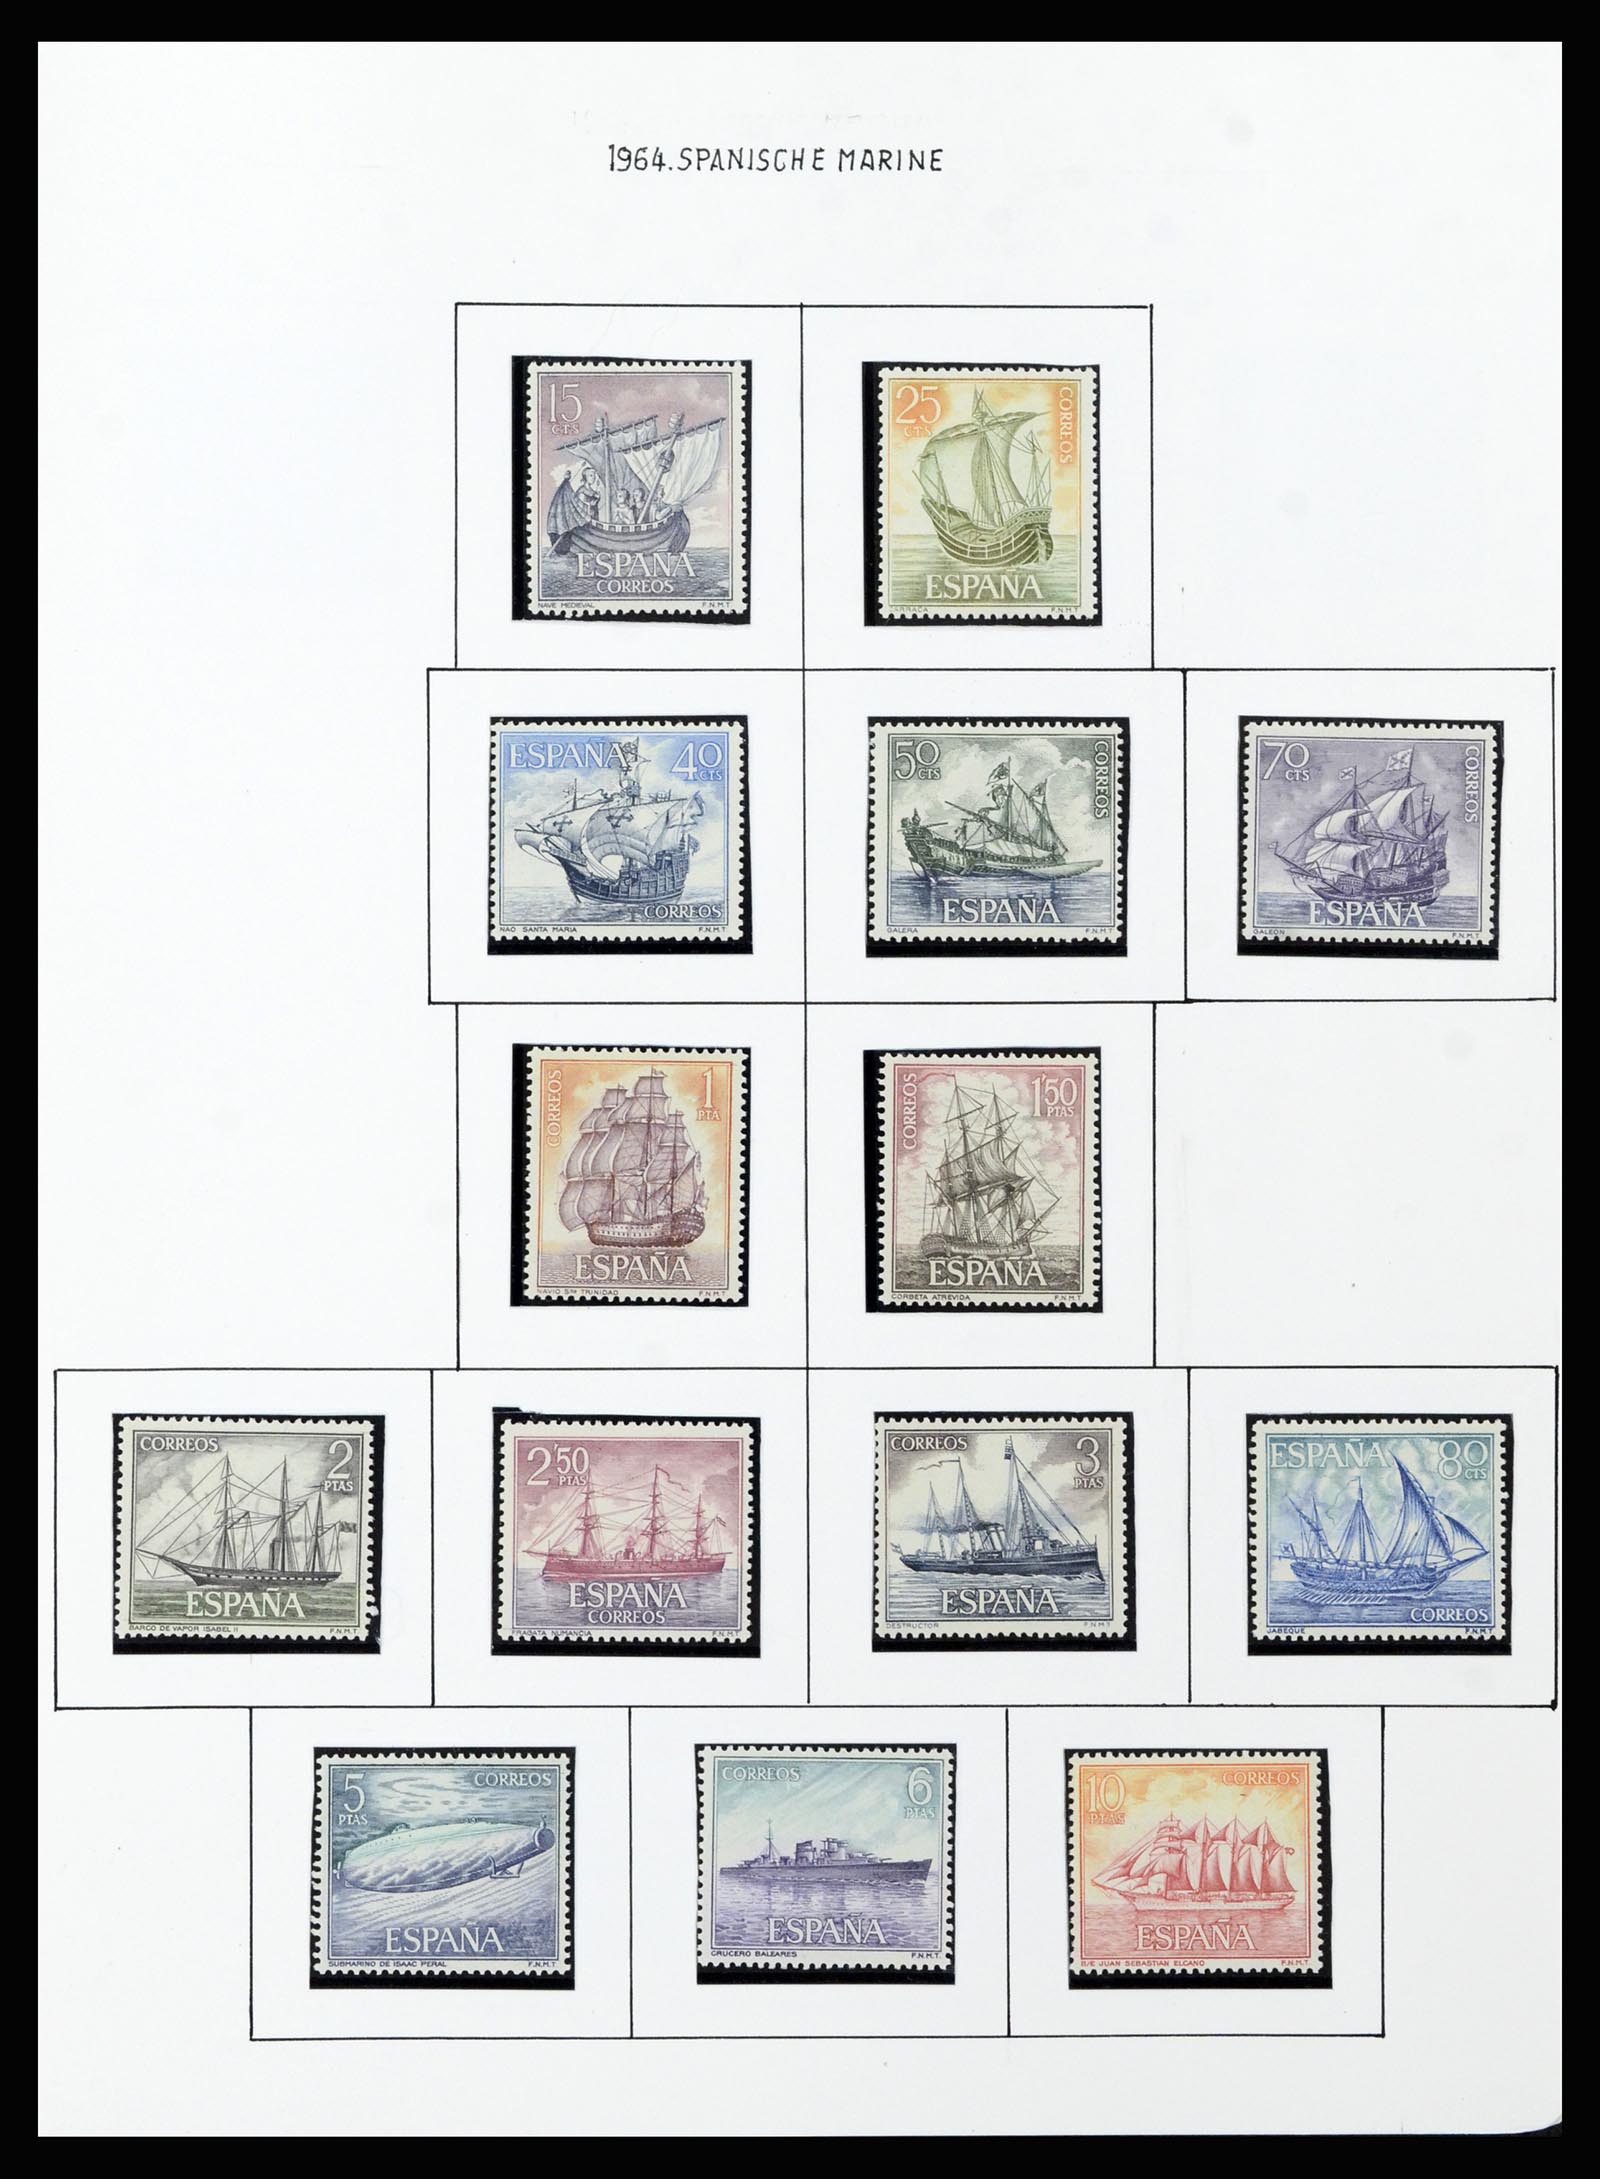 37154 054 - Stamp collection 37154 Spain 1850-1964.